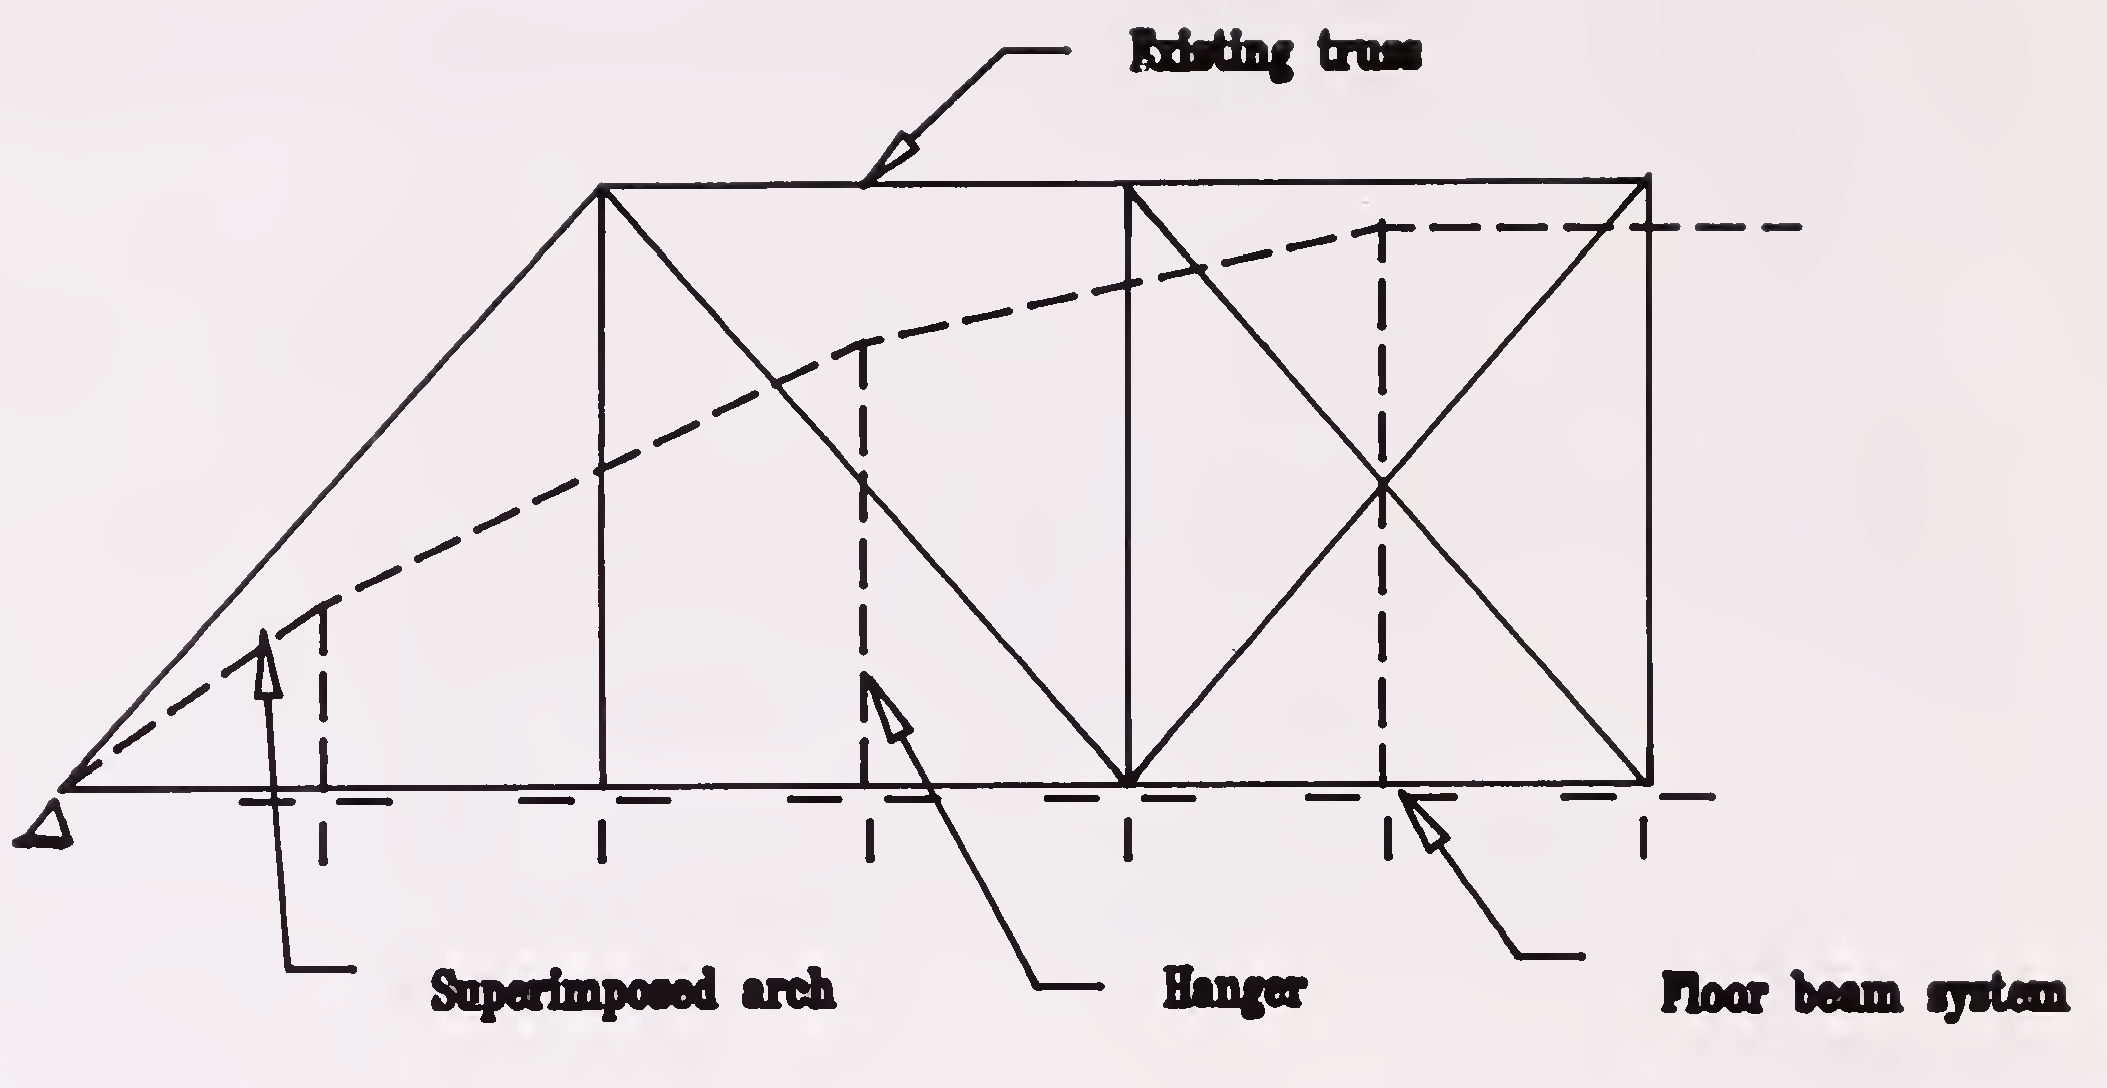 Fig.5.3 Steel arch superimposition to strengthen old truss bridge